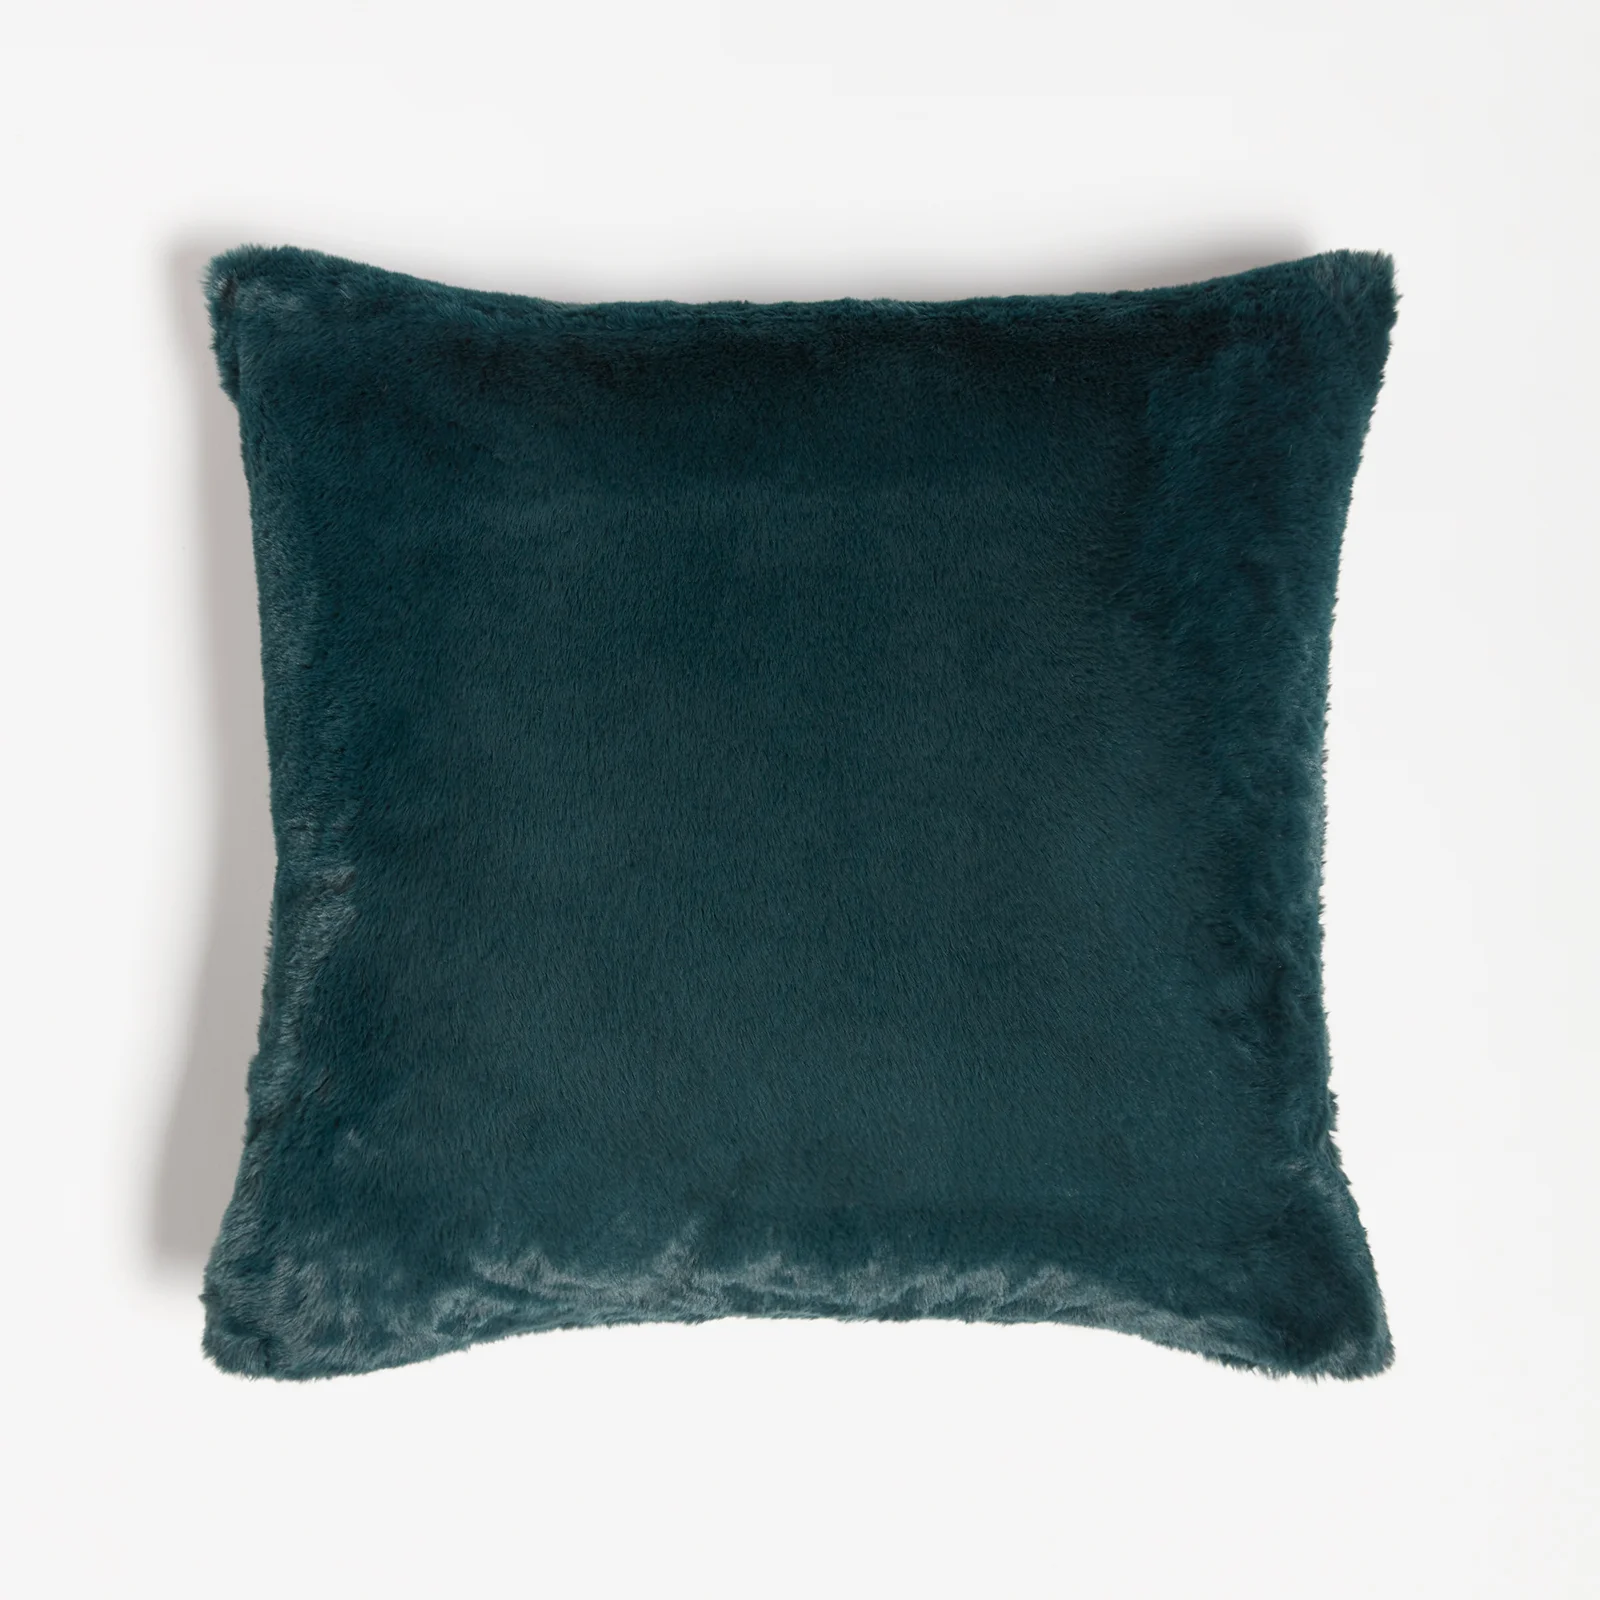 ïn home Recycled Polyester Faux Fur Cushion - Deep Blue Image 1